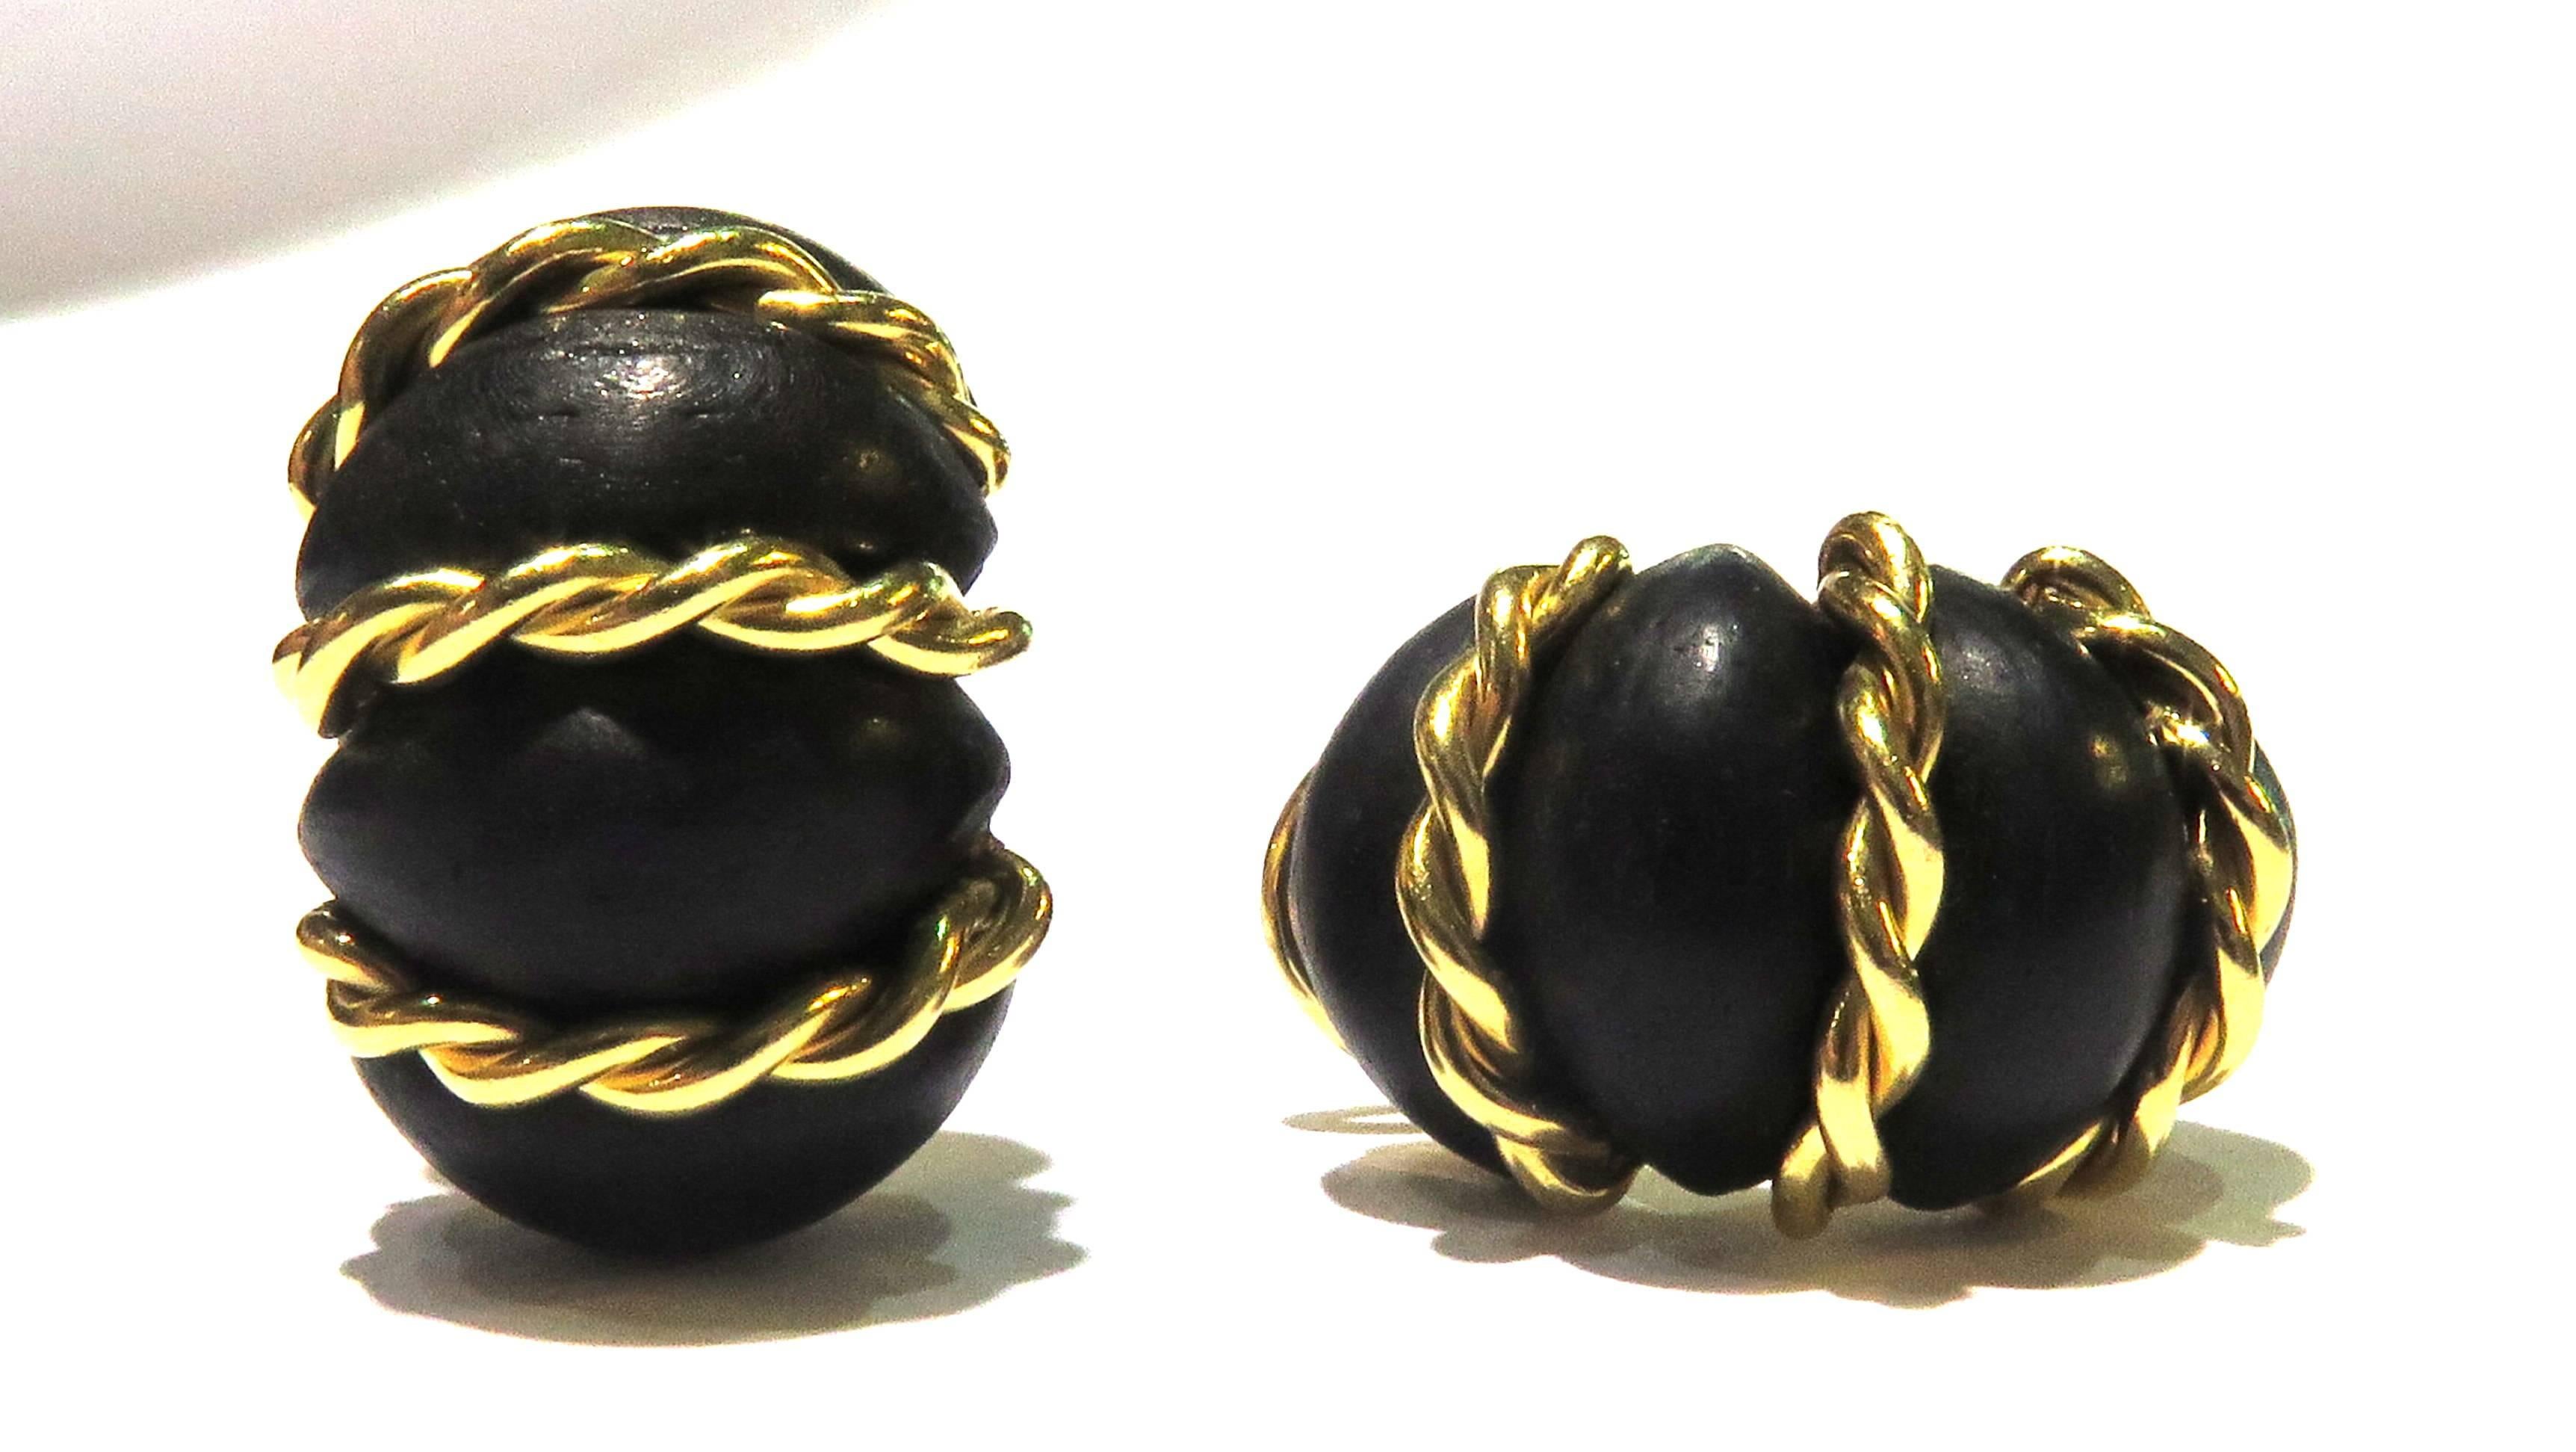 18 Karat timeless Seaman Schepps carved Ebony wood with twisted rope sectioned shrimp earclips. Earrings are made for pierced ears but can be easily made to clips.  Seaman Schepps pieces have been sought after for over 100 years.
 
Earrings are